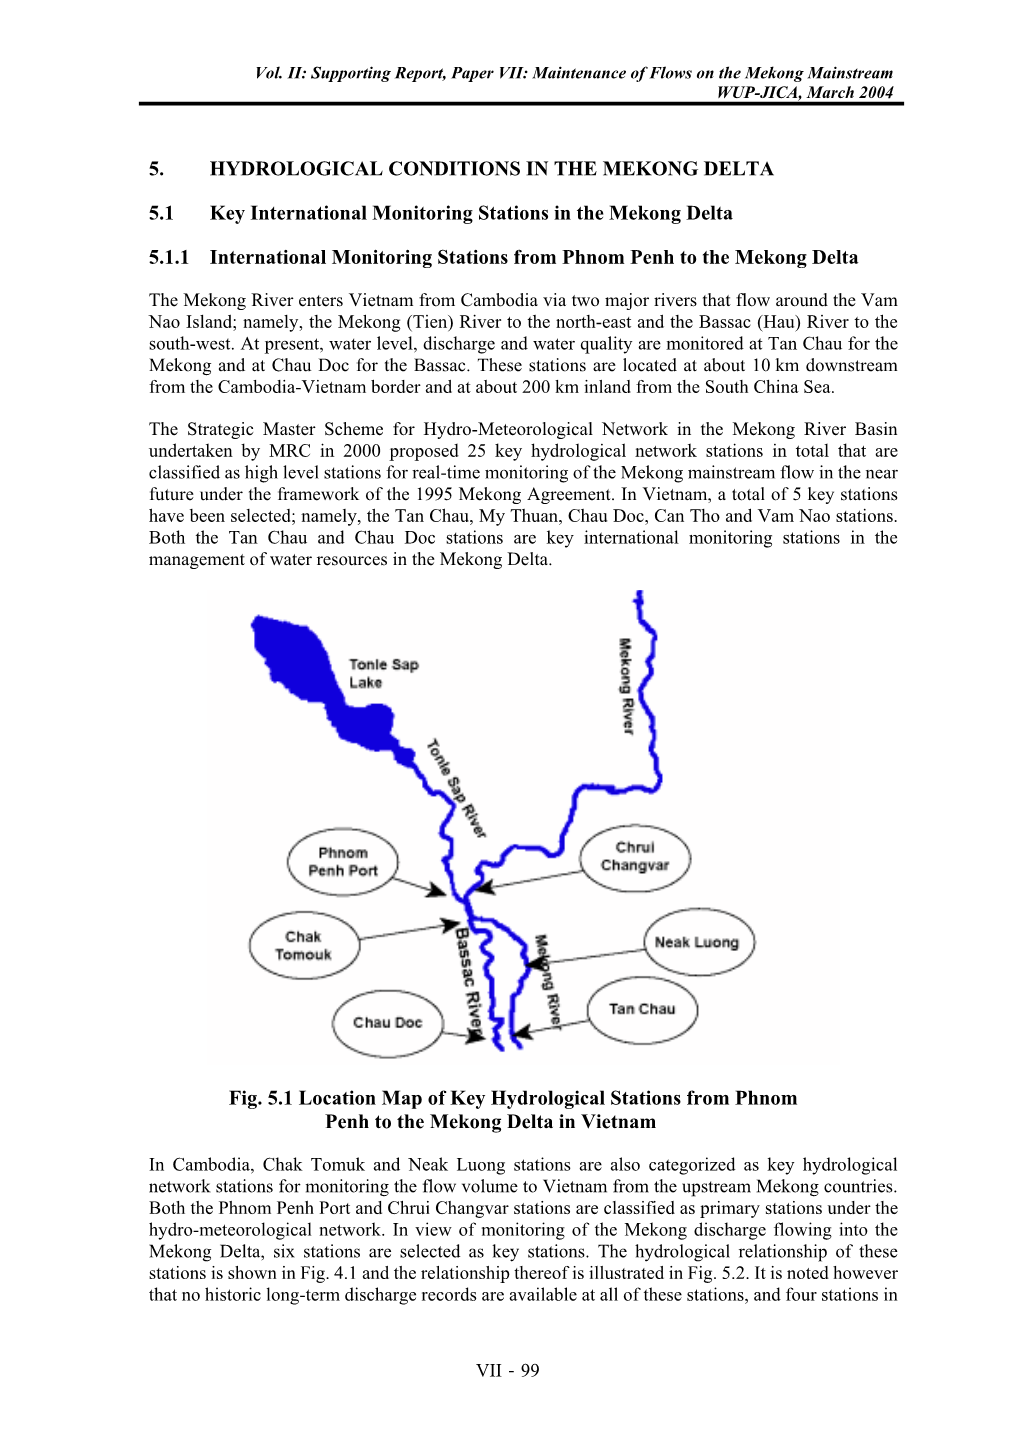 5. HYDROLOGICAL CONDITIONS in the MEKONG DELTA 5.1 Key